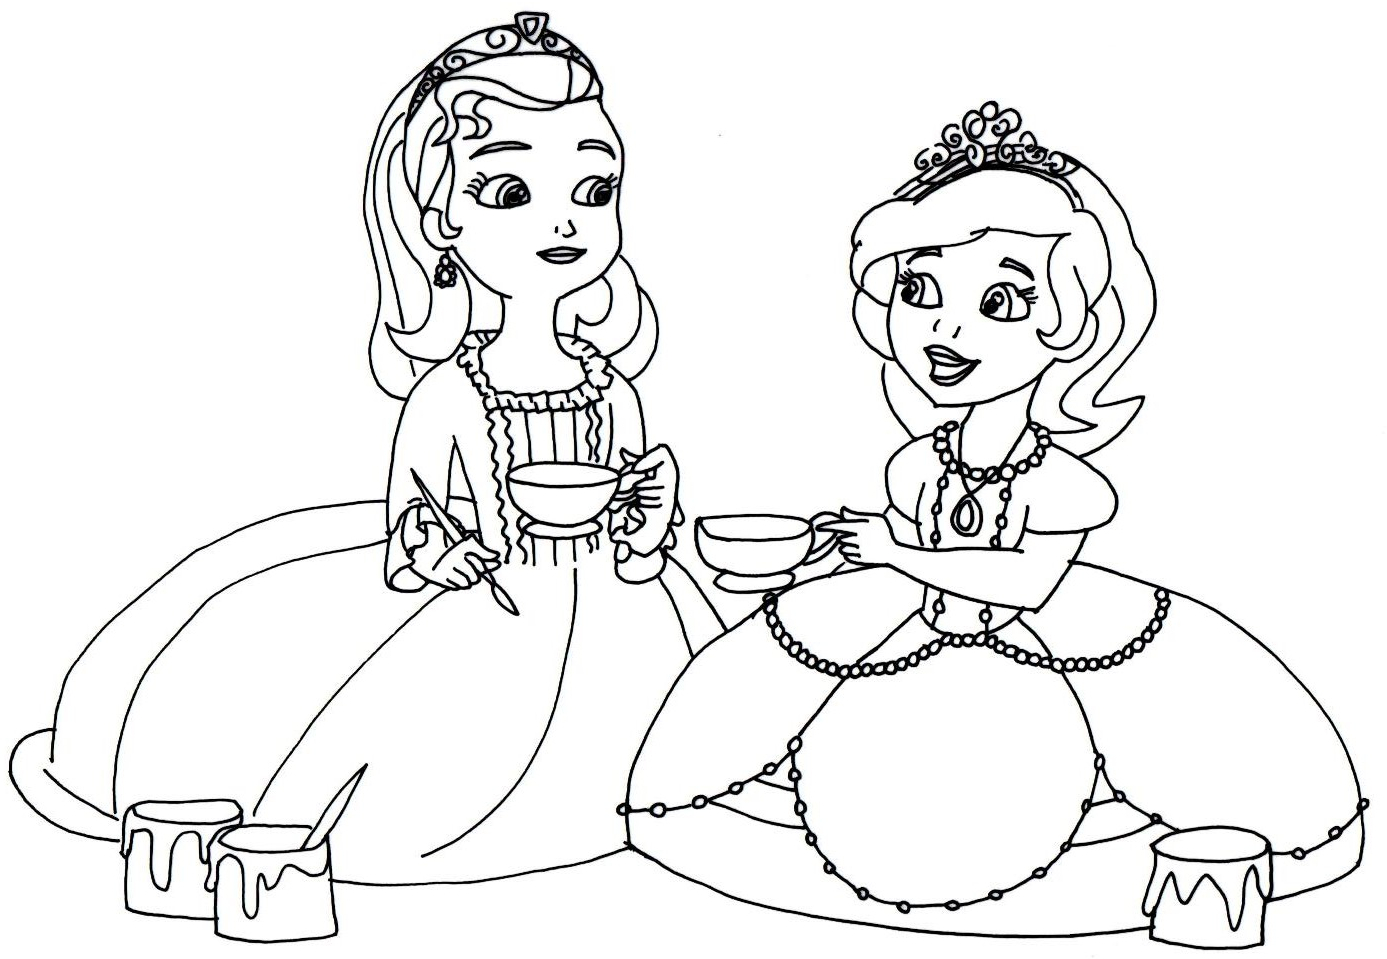 Teacup Coloring Pages To Print Sofia The First Coloring Pages Tea Cups Sofia The First 8692